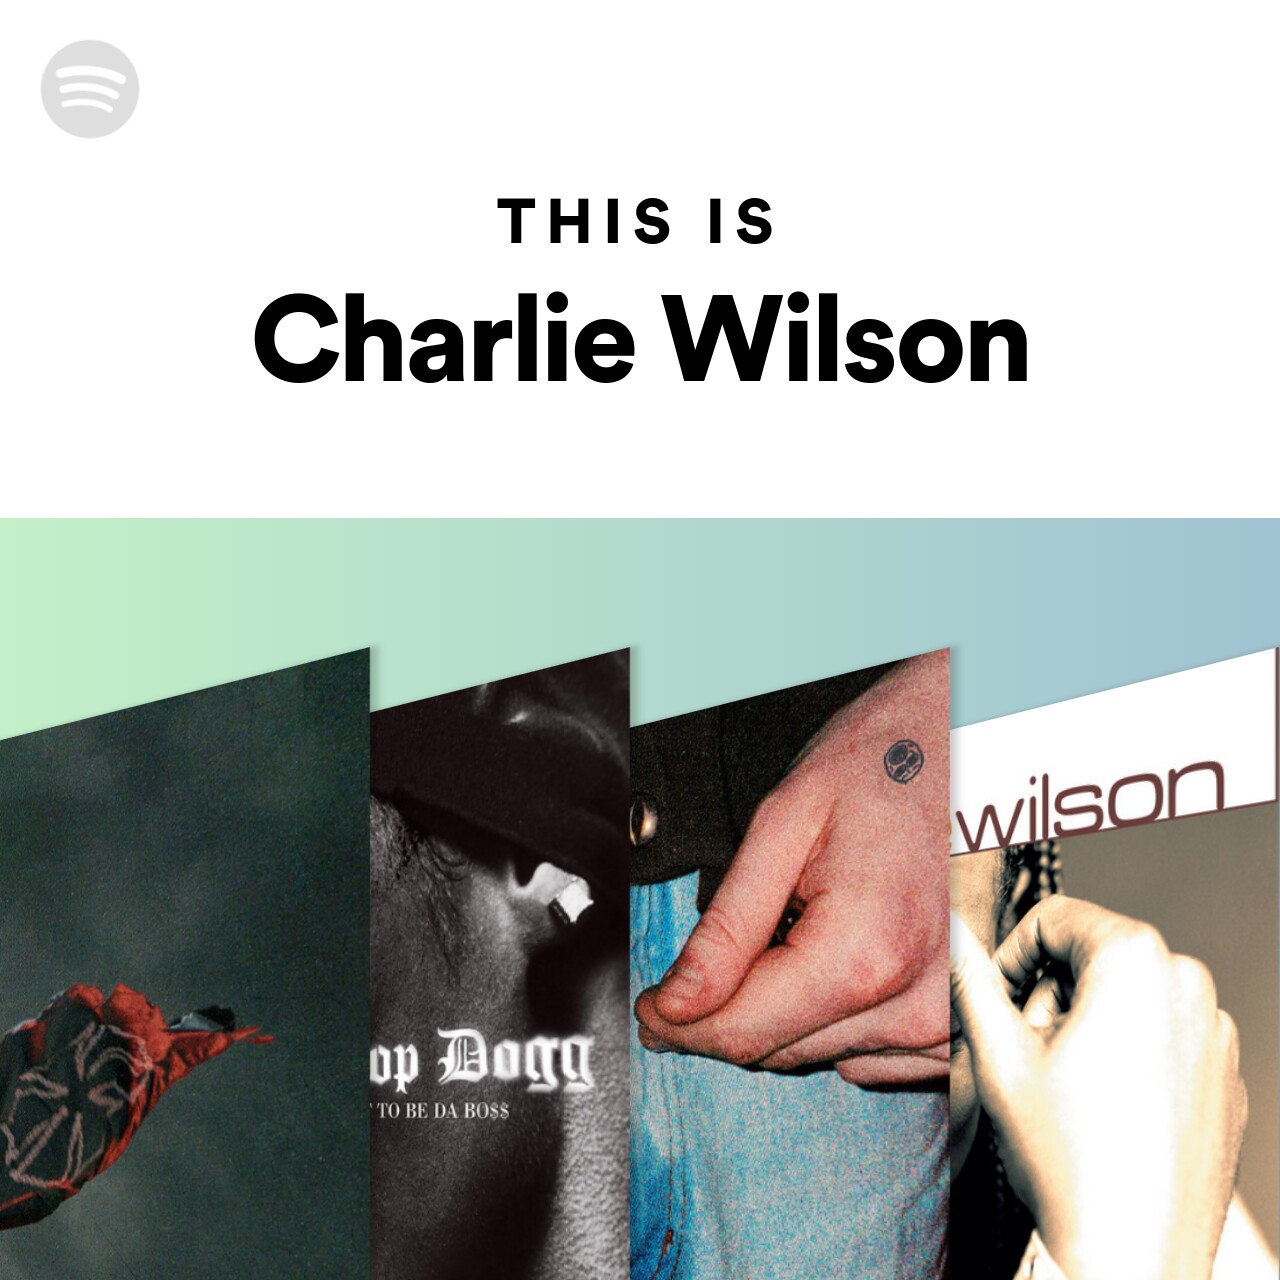 you are charlie wilson download